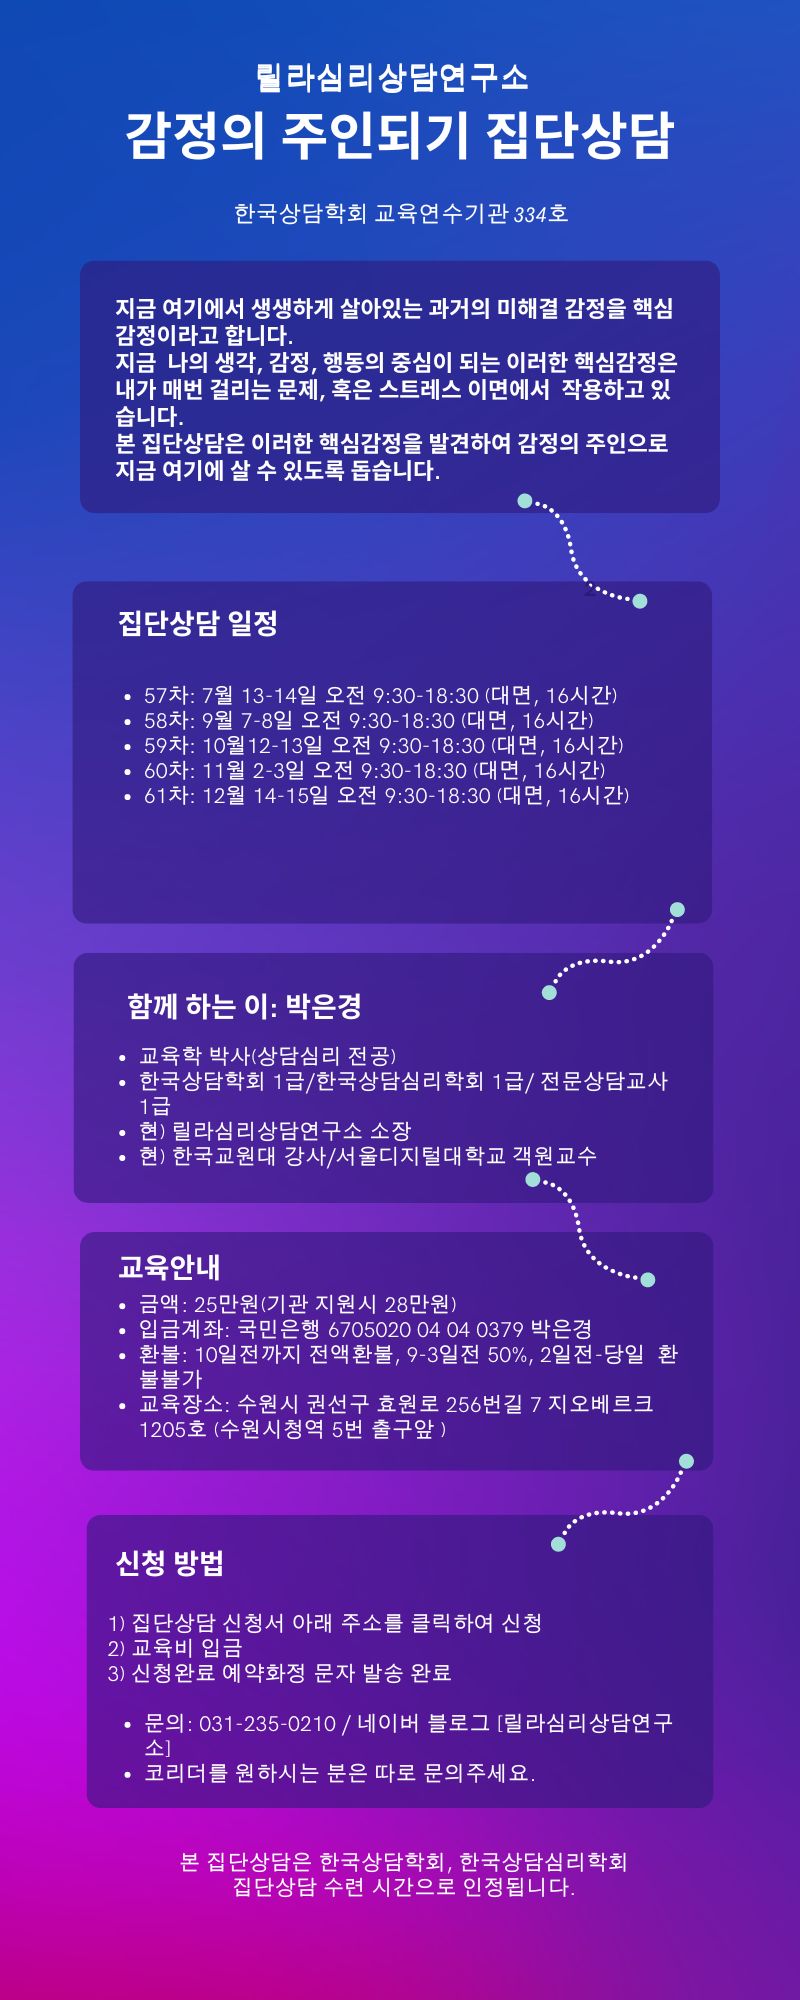 Purple Modern Gradient Steps How To Start A Business Tips Infographic.jpg